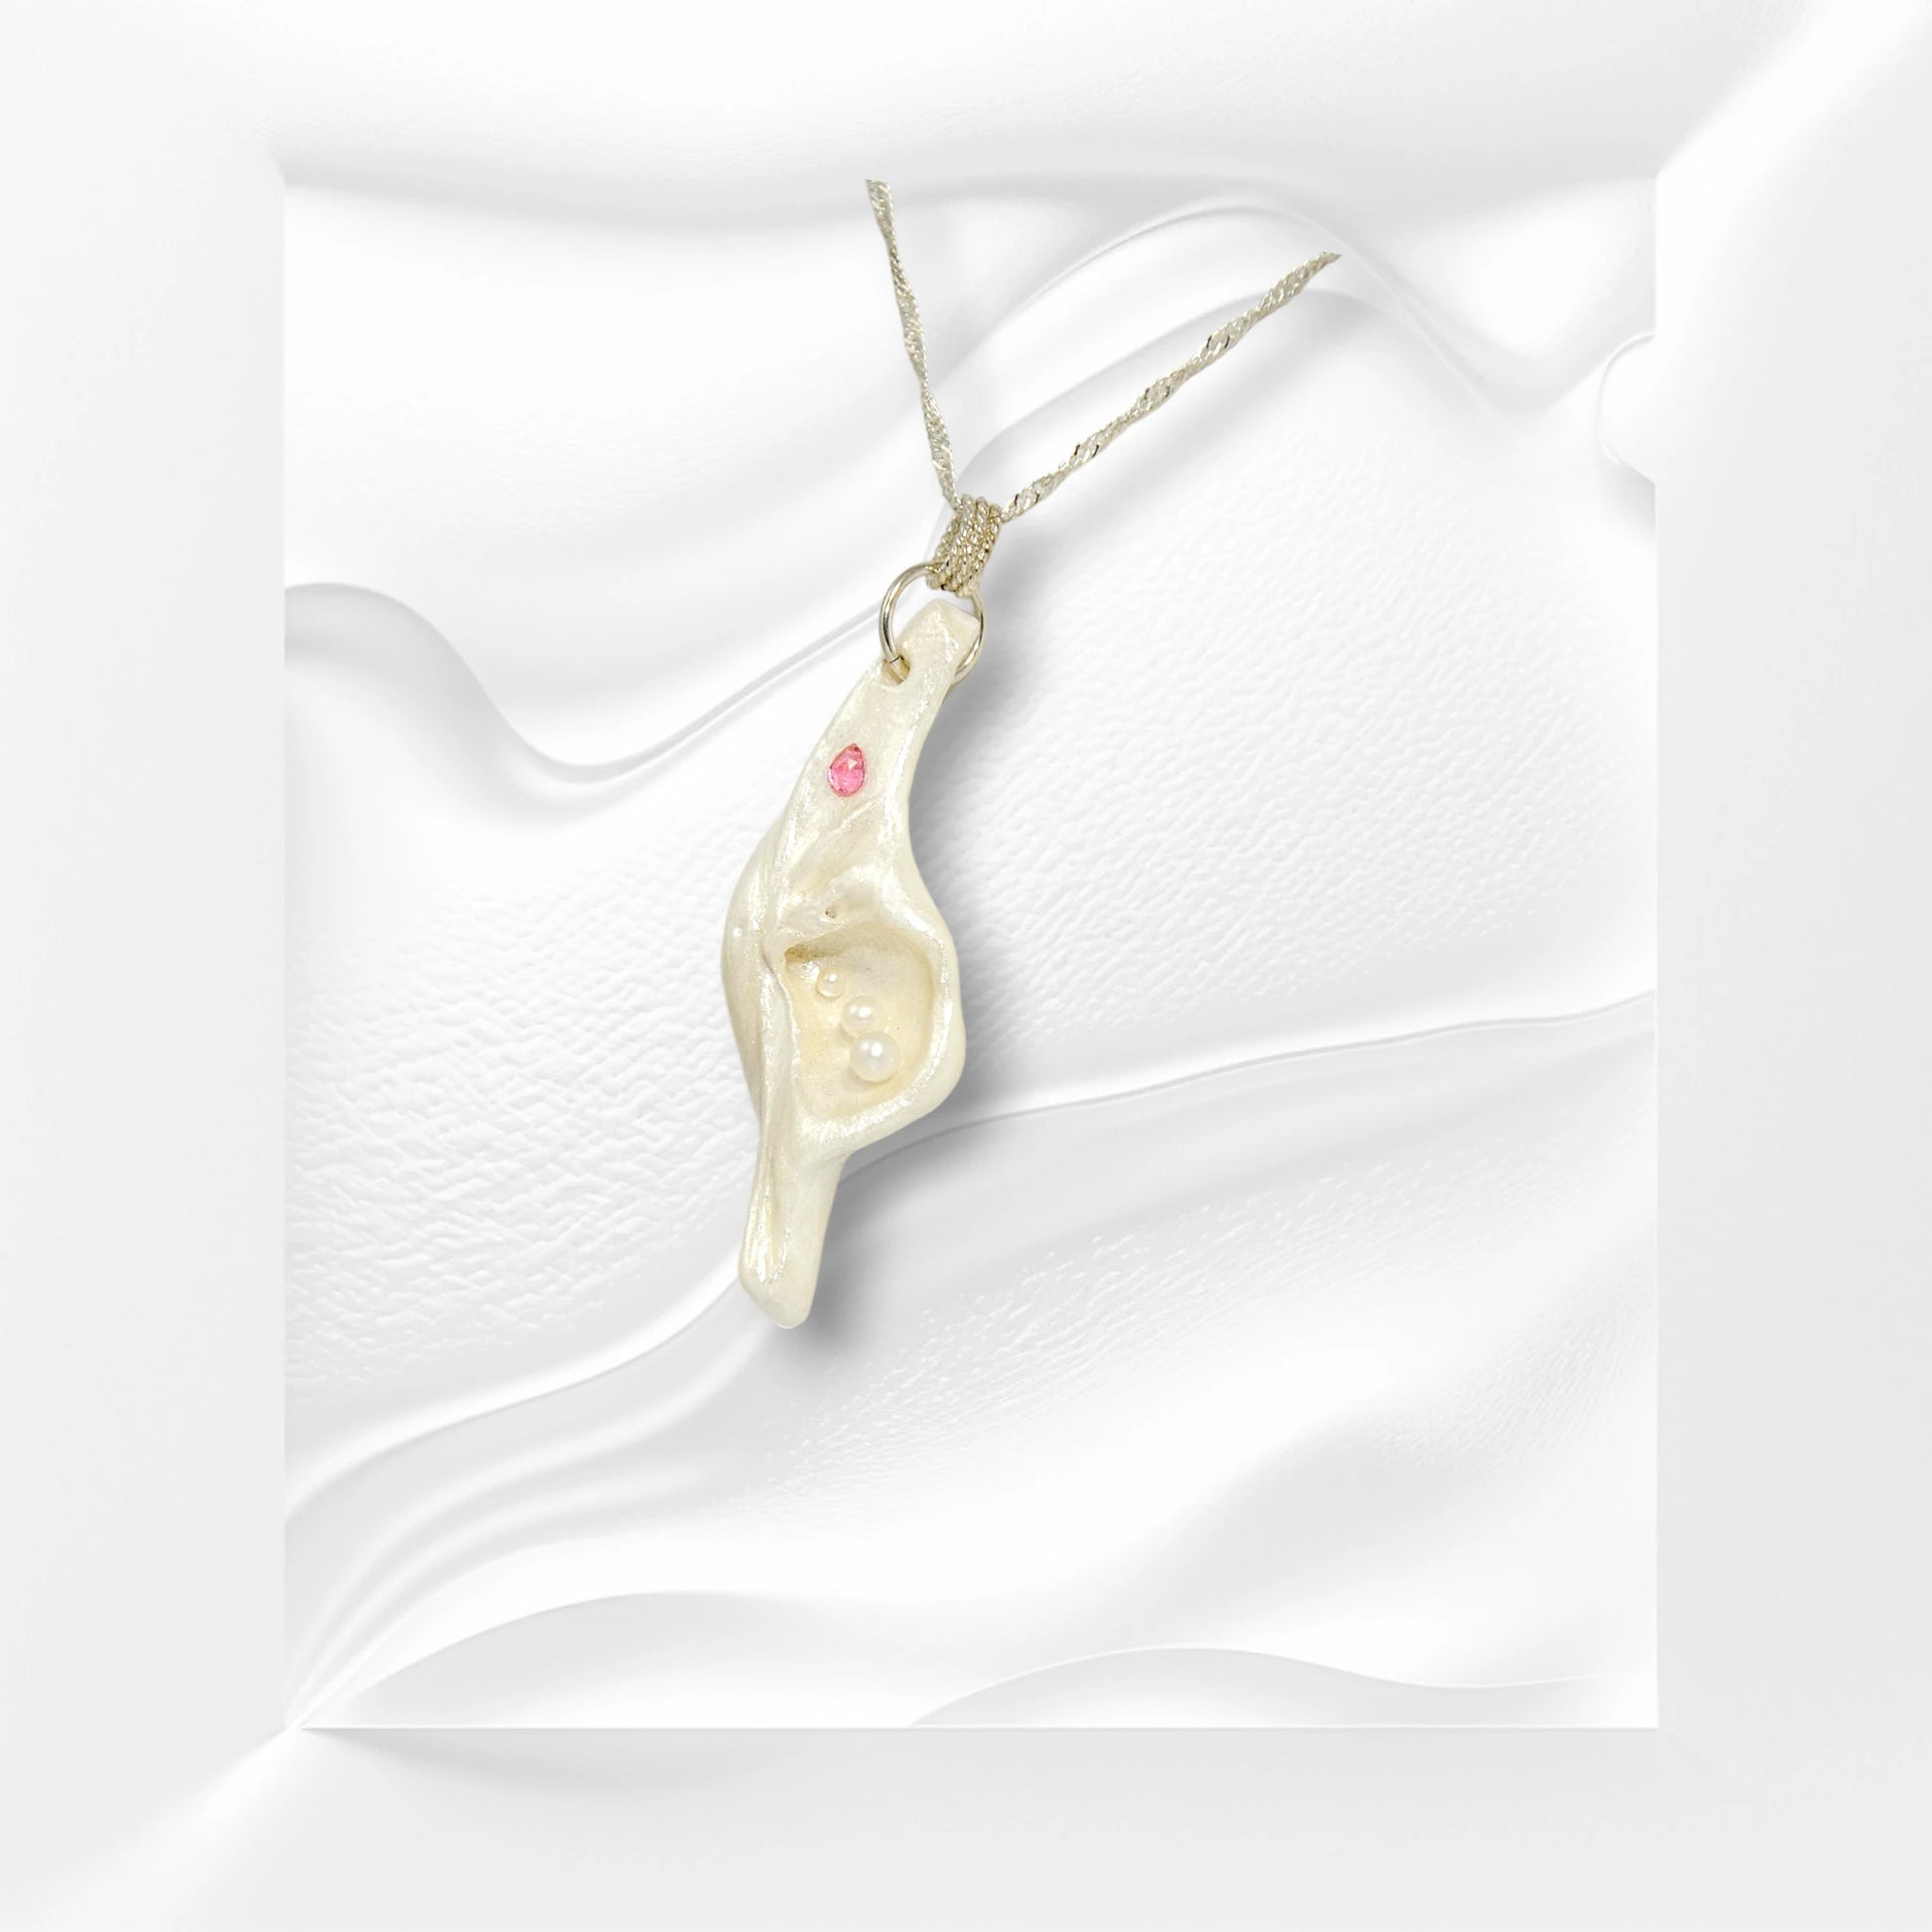 A trio of white baby freshwater pearls and a teardrop rose cut pink tourmaline gemstone compliments the seashell pendant beautifully. The pendant is turned to the viewer can see the right side of the pendant.